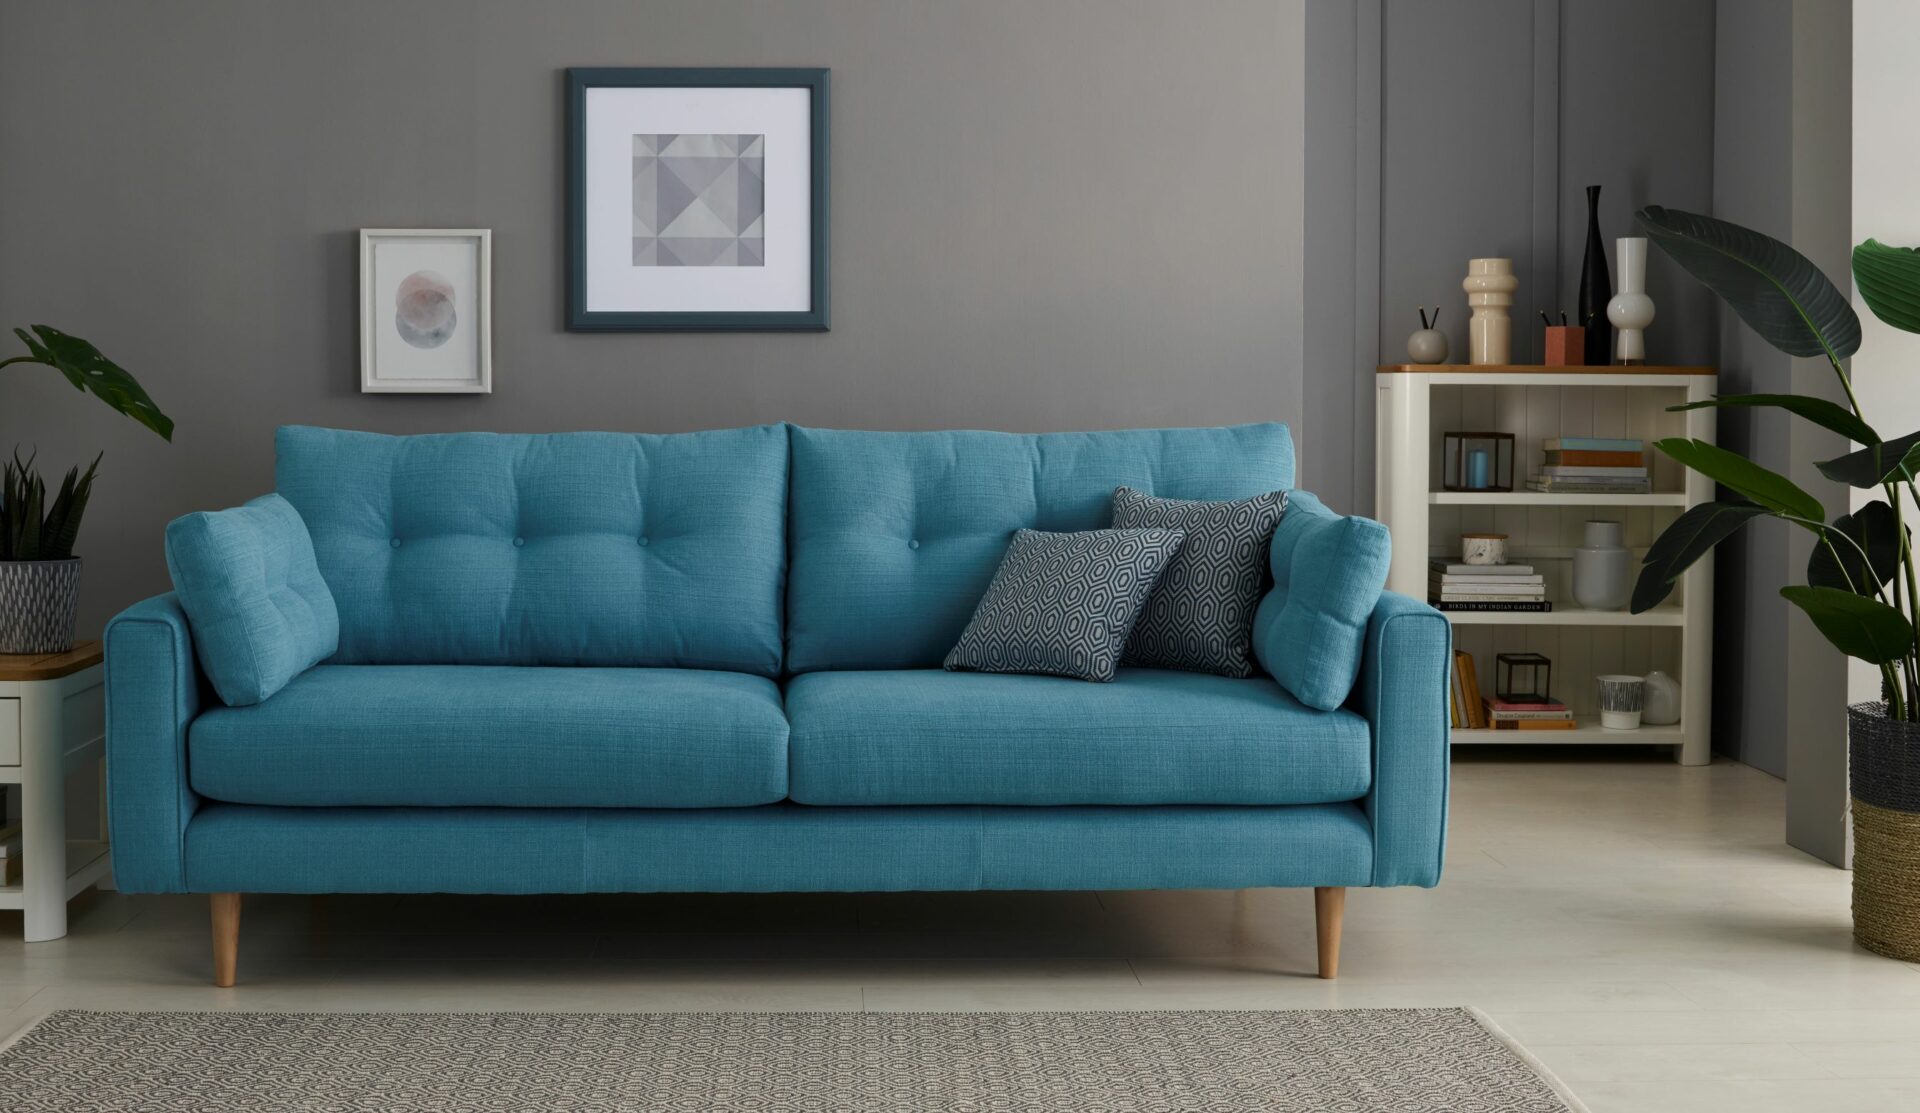 Brighton teal mid-century style sofa with slim wooden legs in a stylish living room.